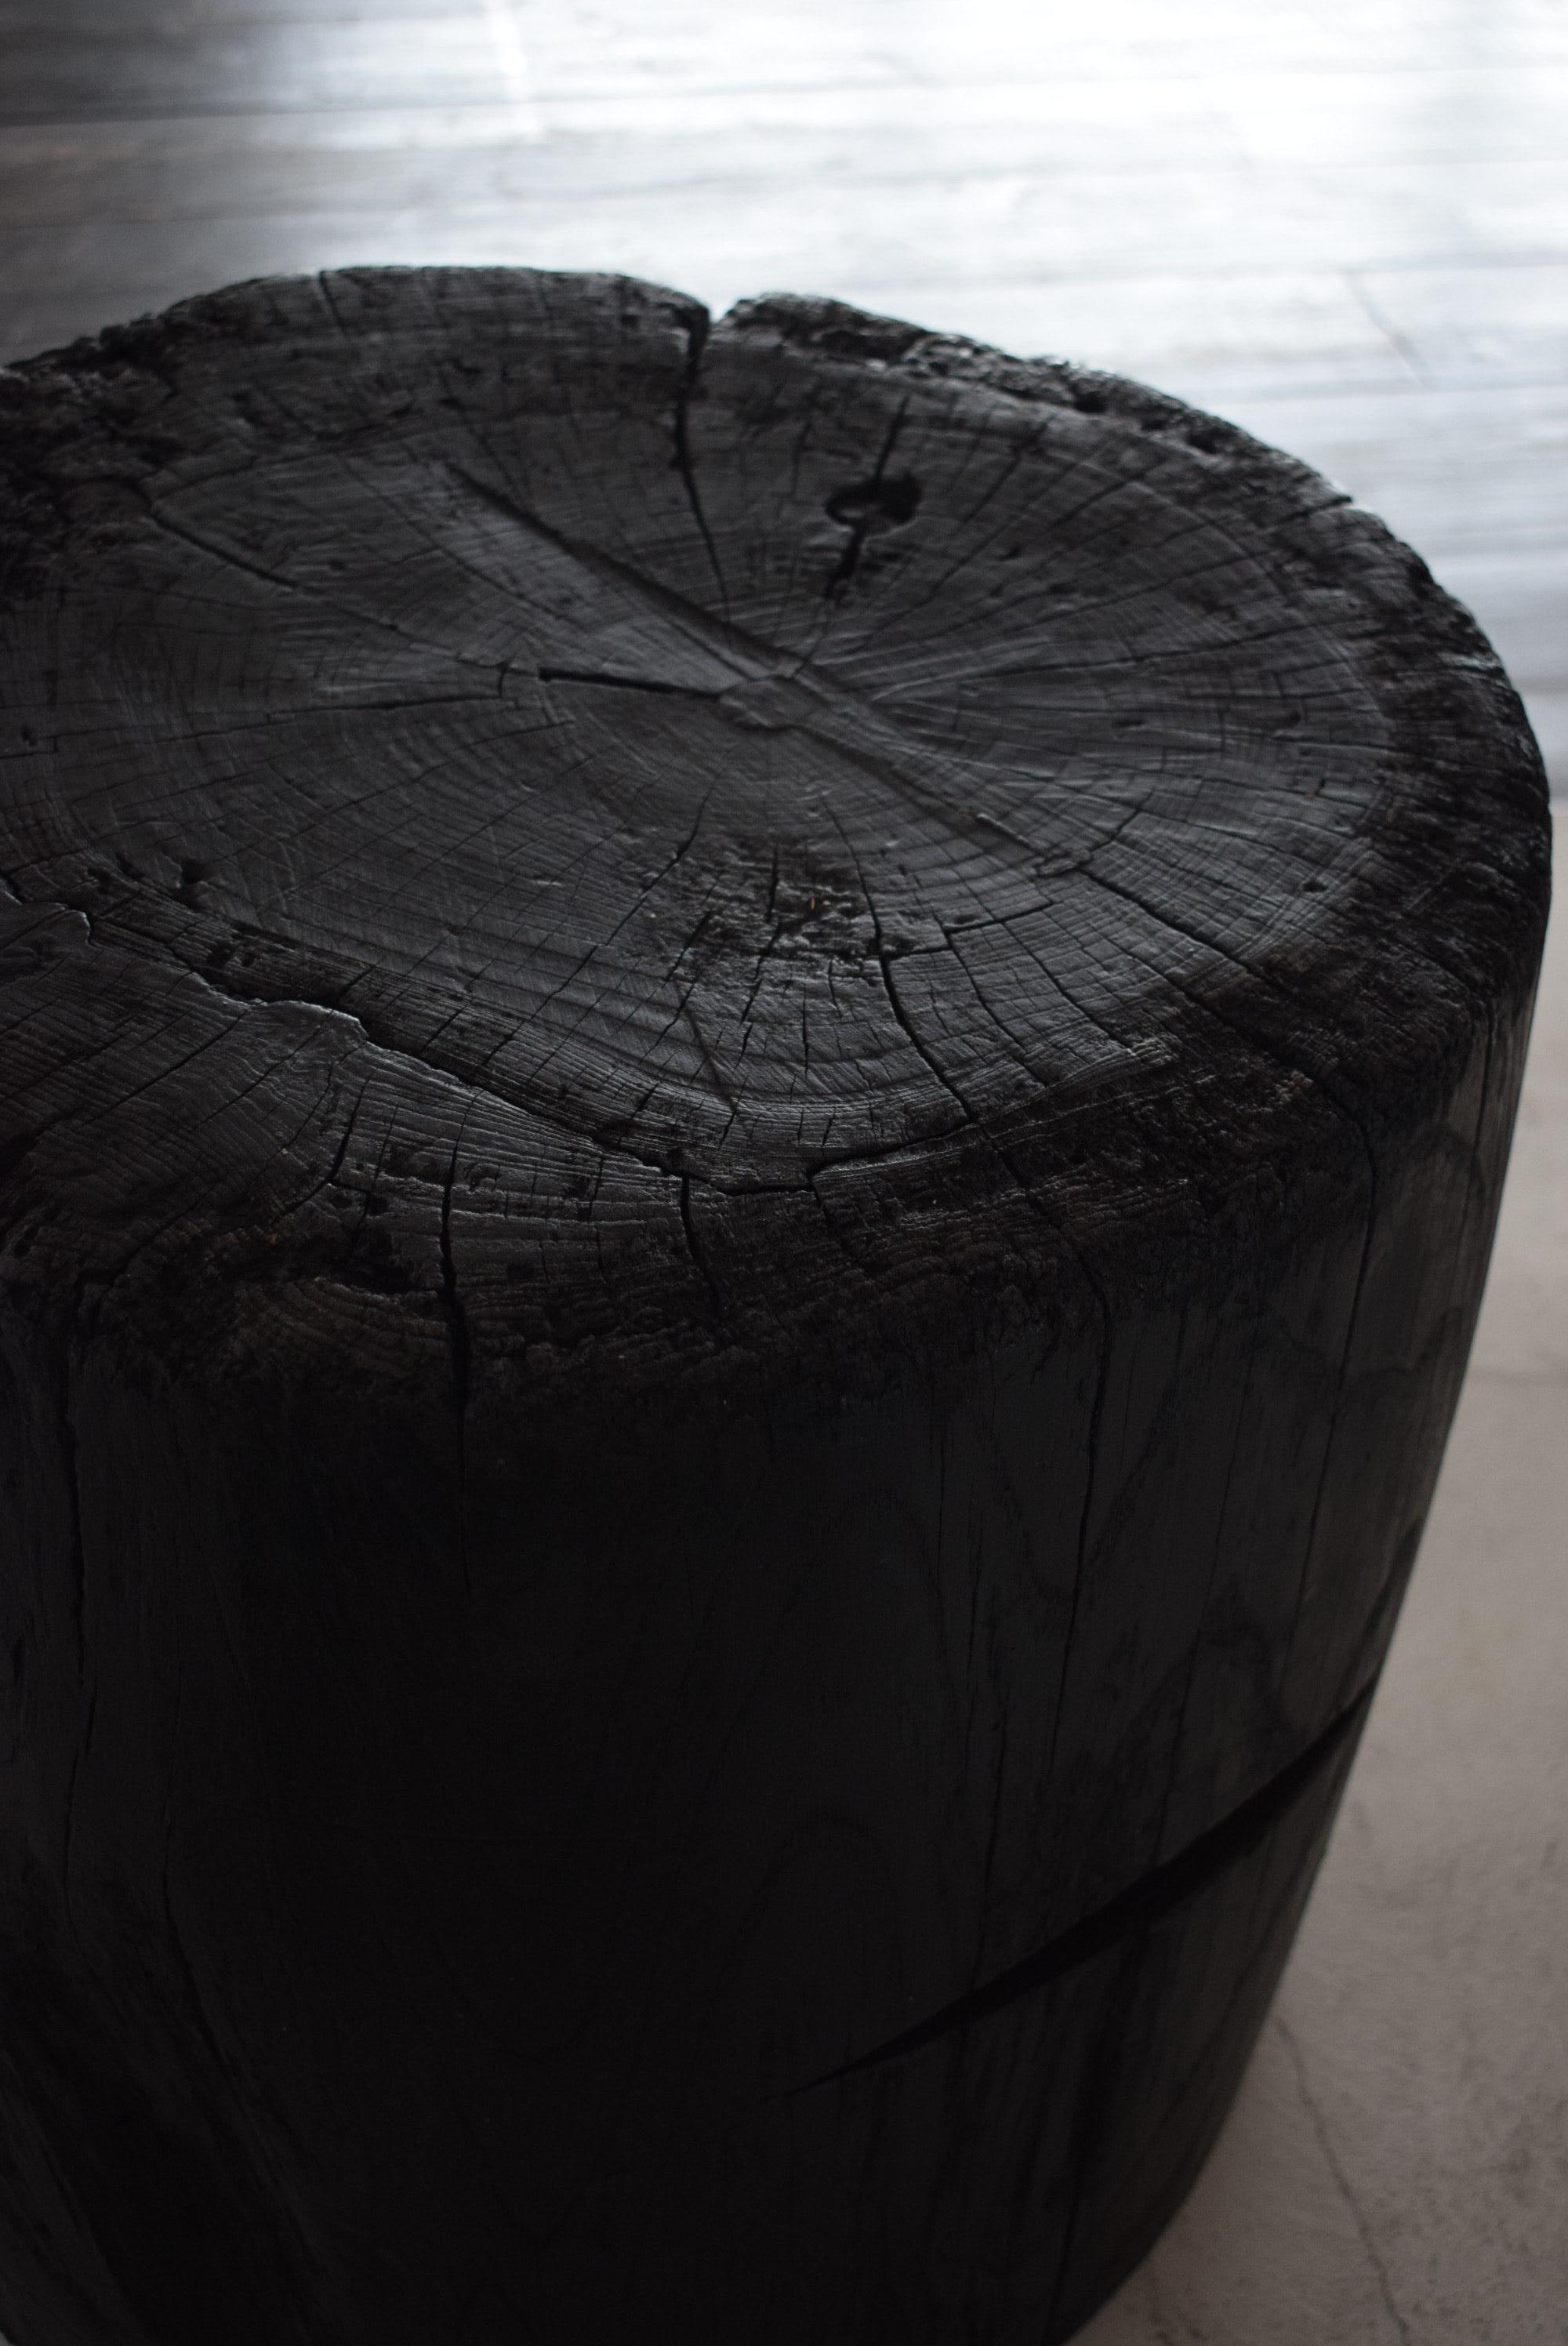 A table made from an old Japanese mortar (a container used for pounding grain and rice cake with a pestle. Things are placed inside the mortar).

It is a heavy and sturdy table that has a Japanese feel and gives you a sense of wabi-sabi.